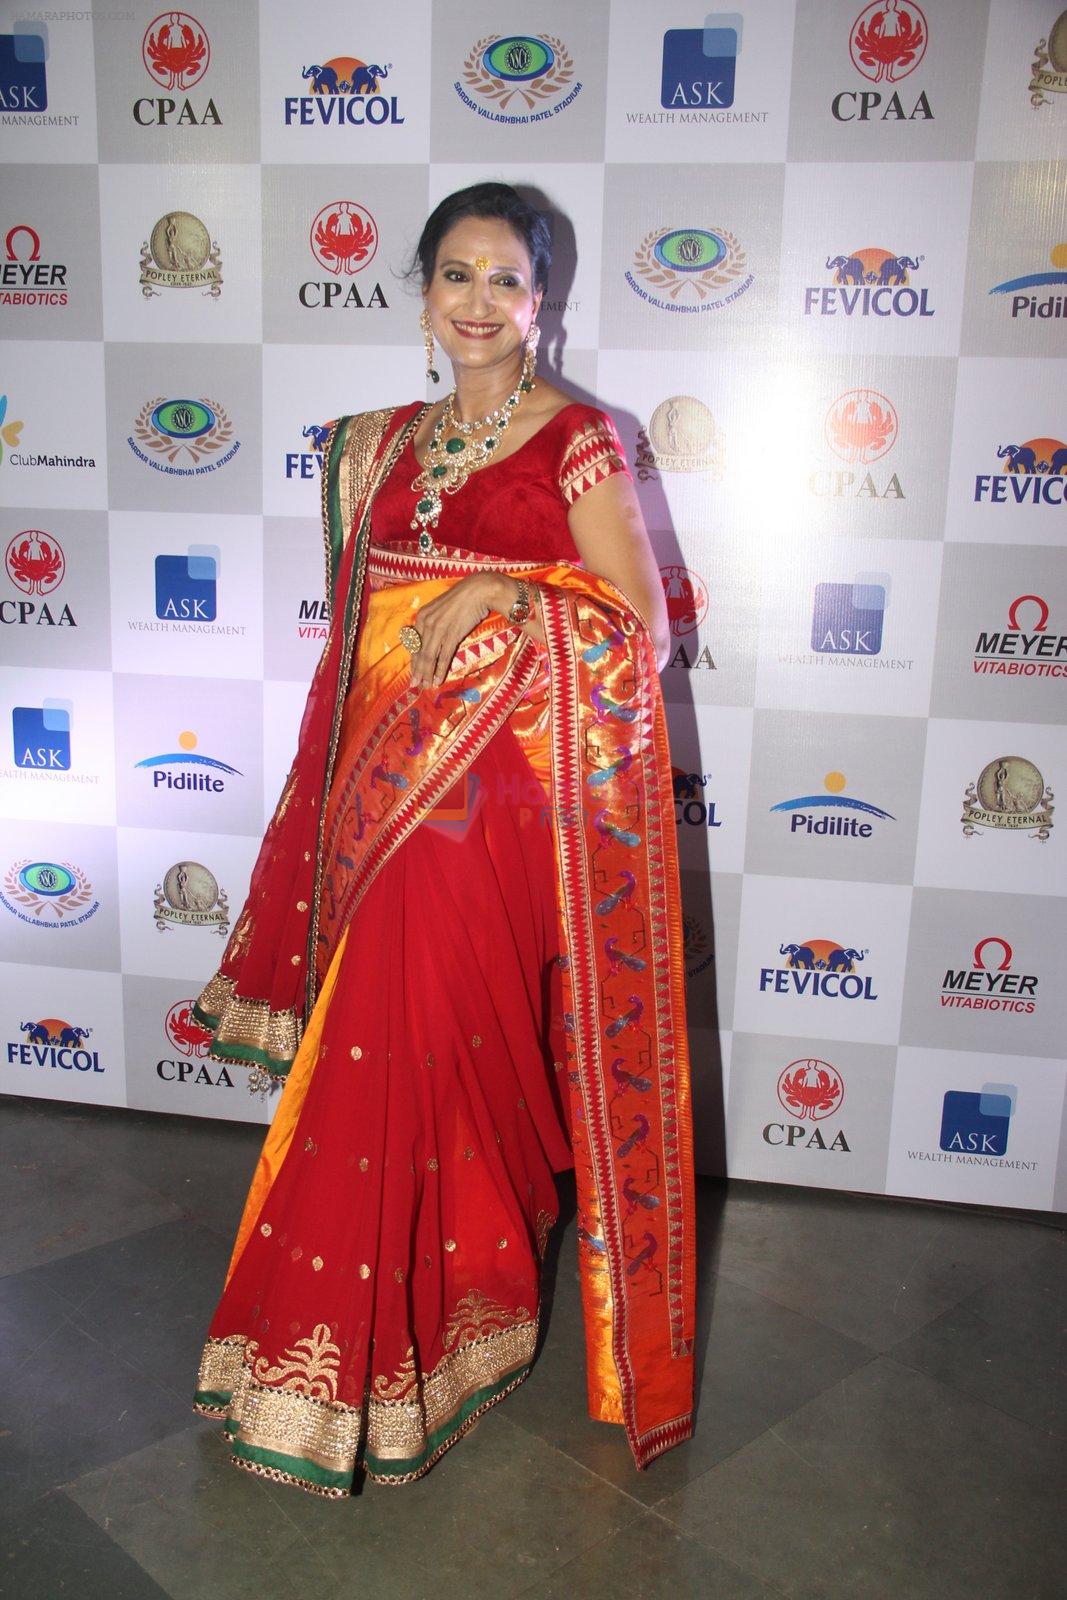 at CPAA Fevicol SHOW on 20th March 2016